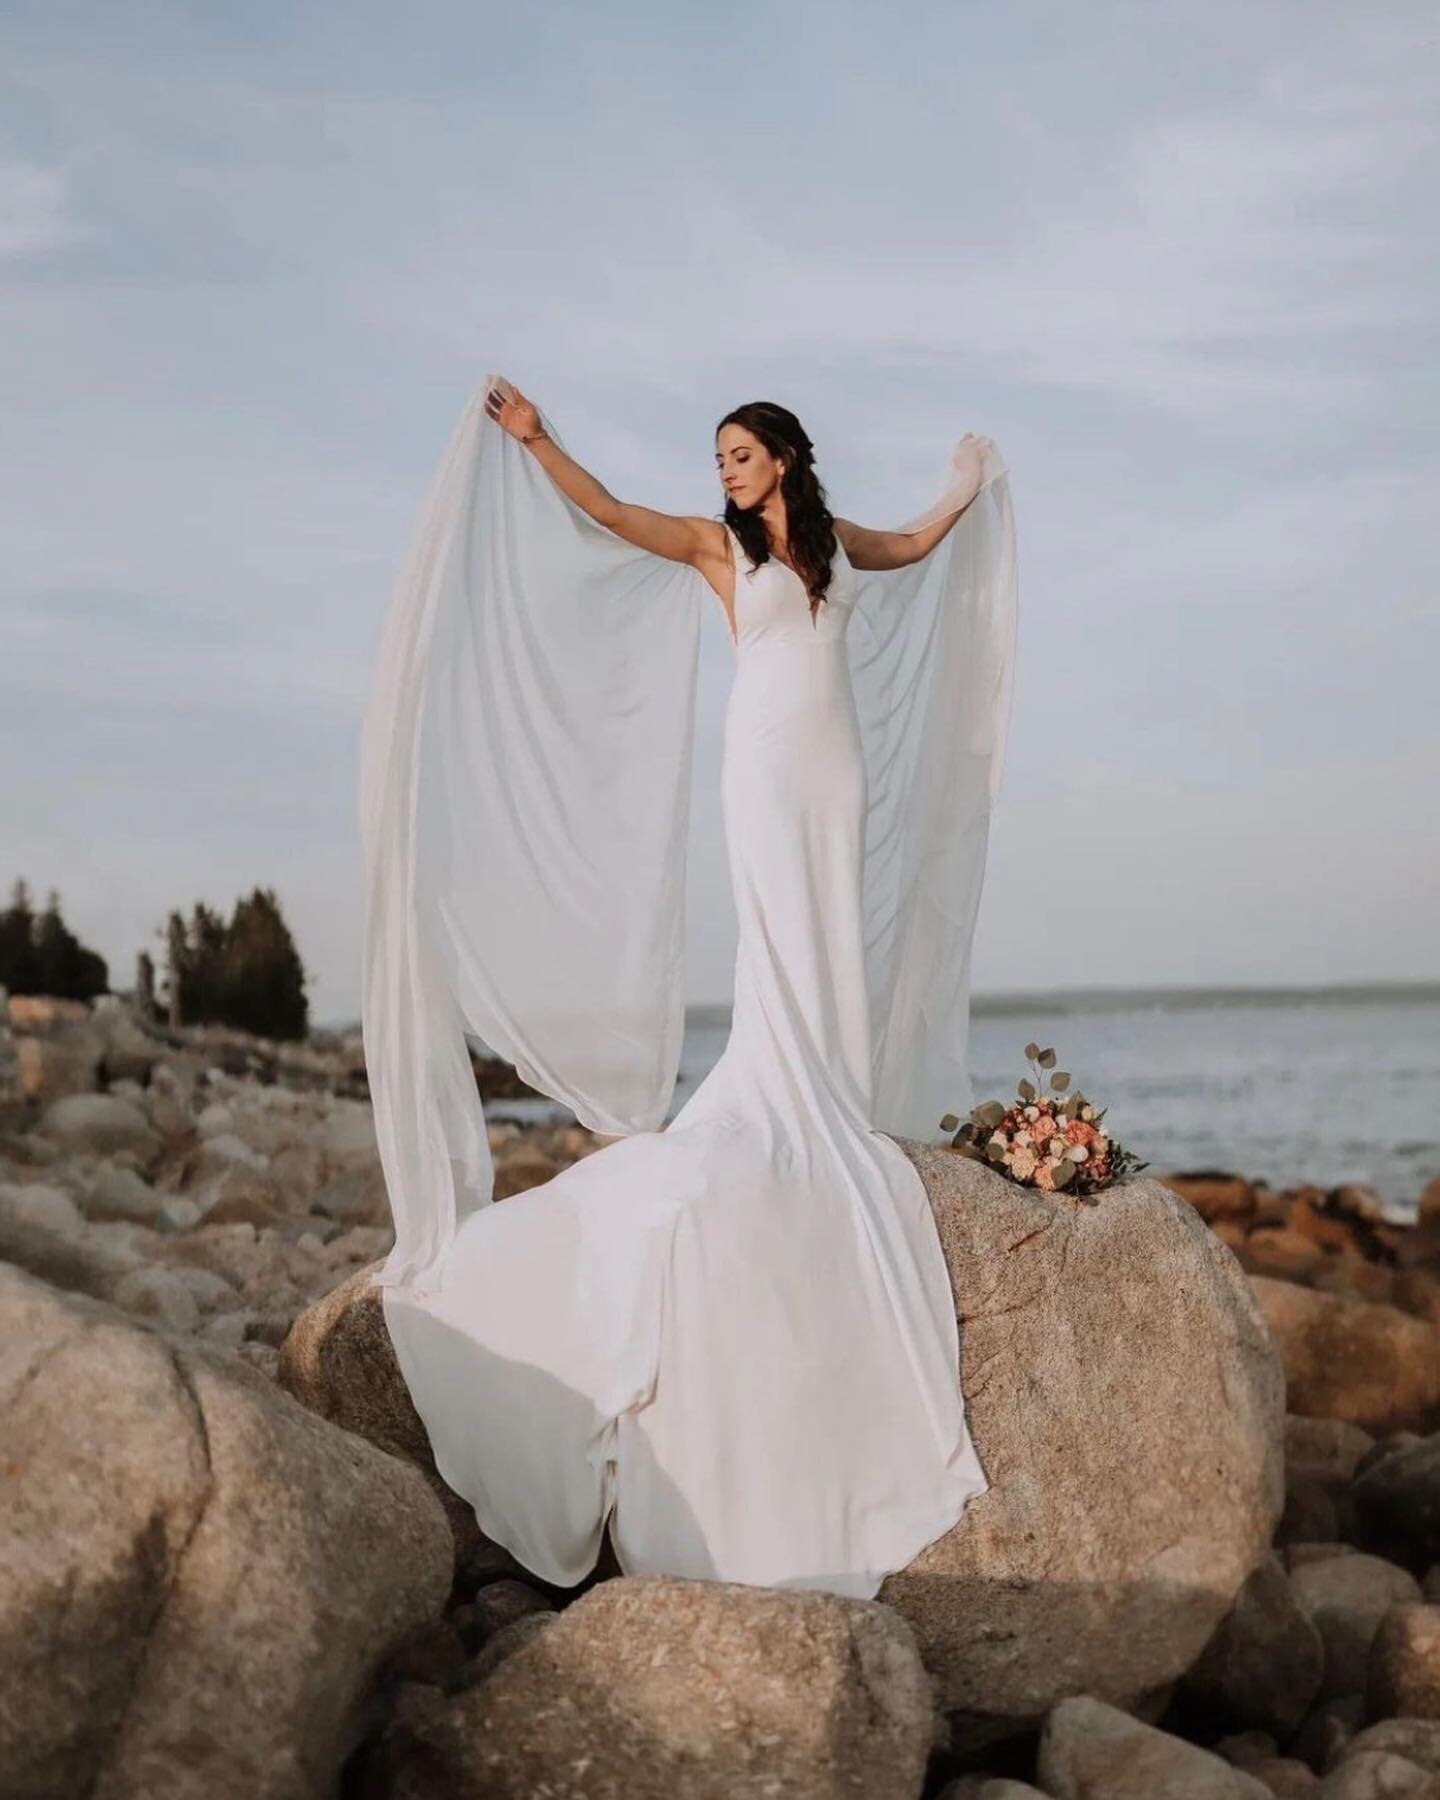 Okaaaaaaaaay 🤩🤩🤩🤩🤩
@brittcream literally killed it with this dress! The cape, I can&rsquo;t handle it 😍
These photos are art, so breath taking Xo
You looked stunning Britt on your wedding day!!! You belong on the cover of @vogueweddings 🙌🏼
.
